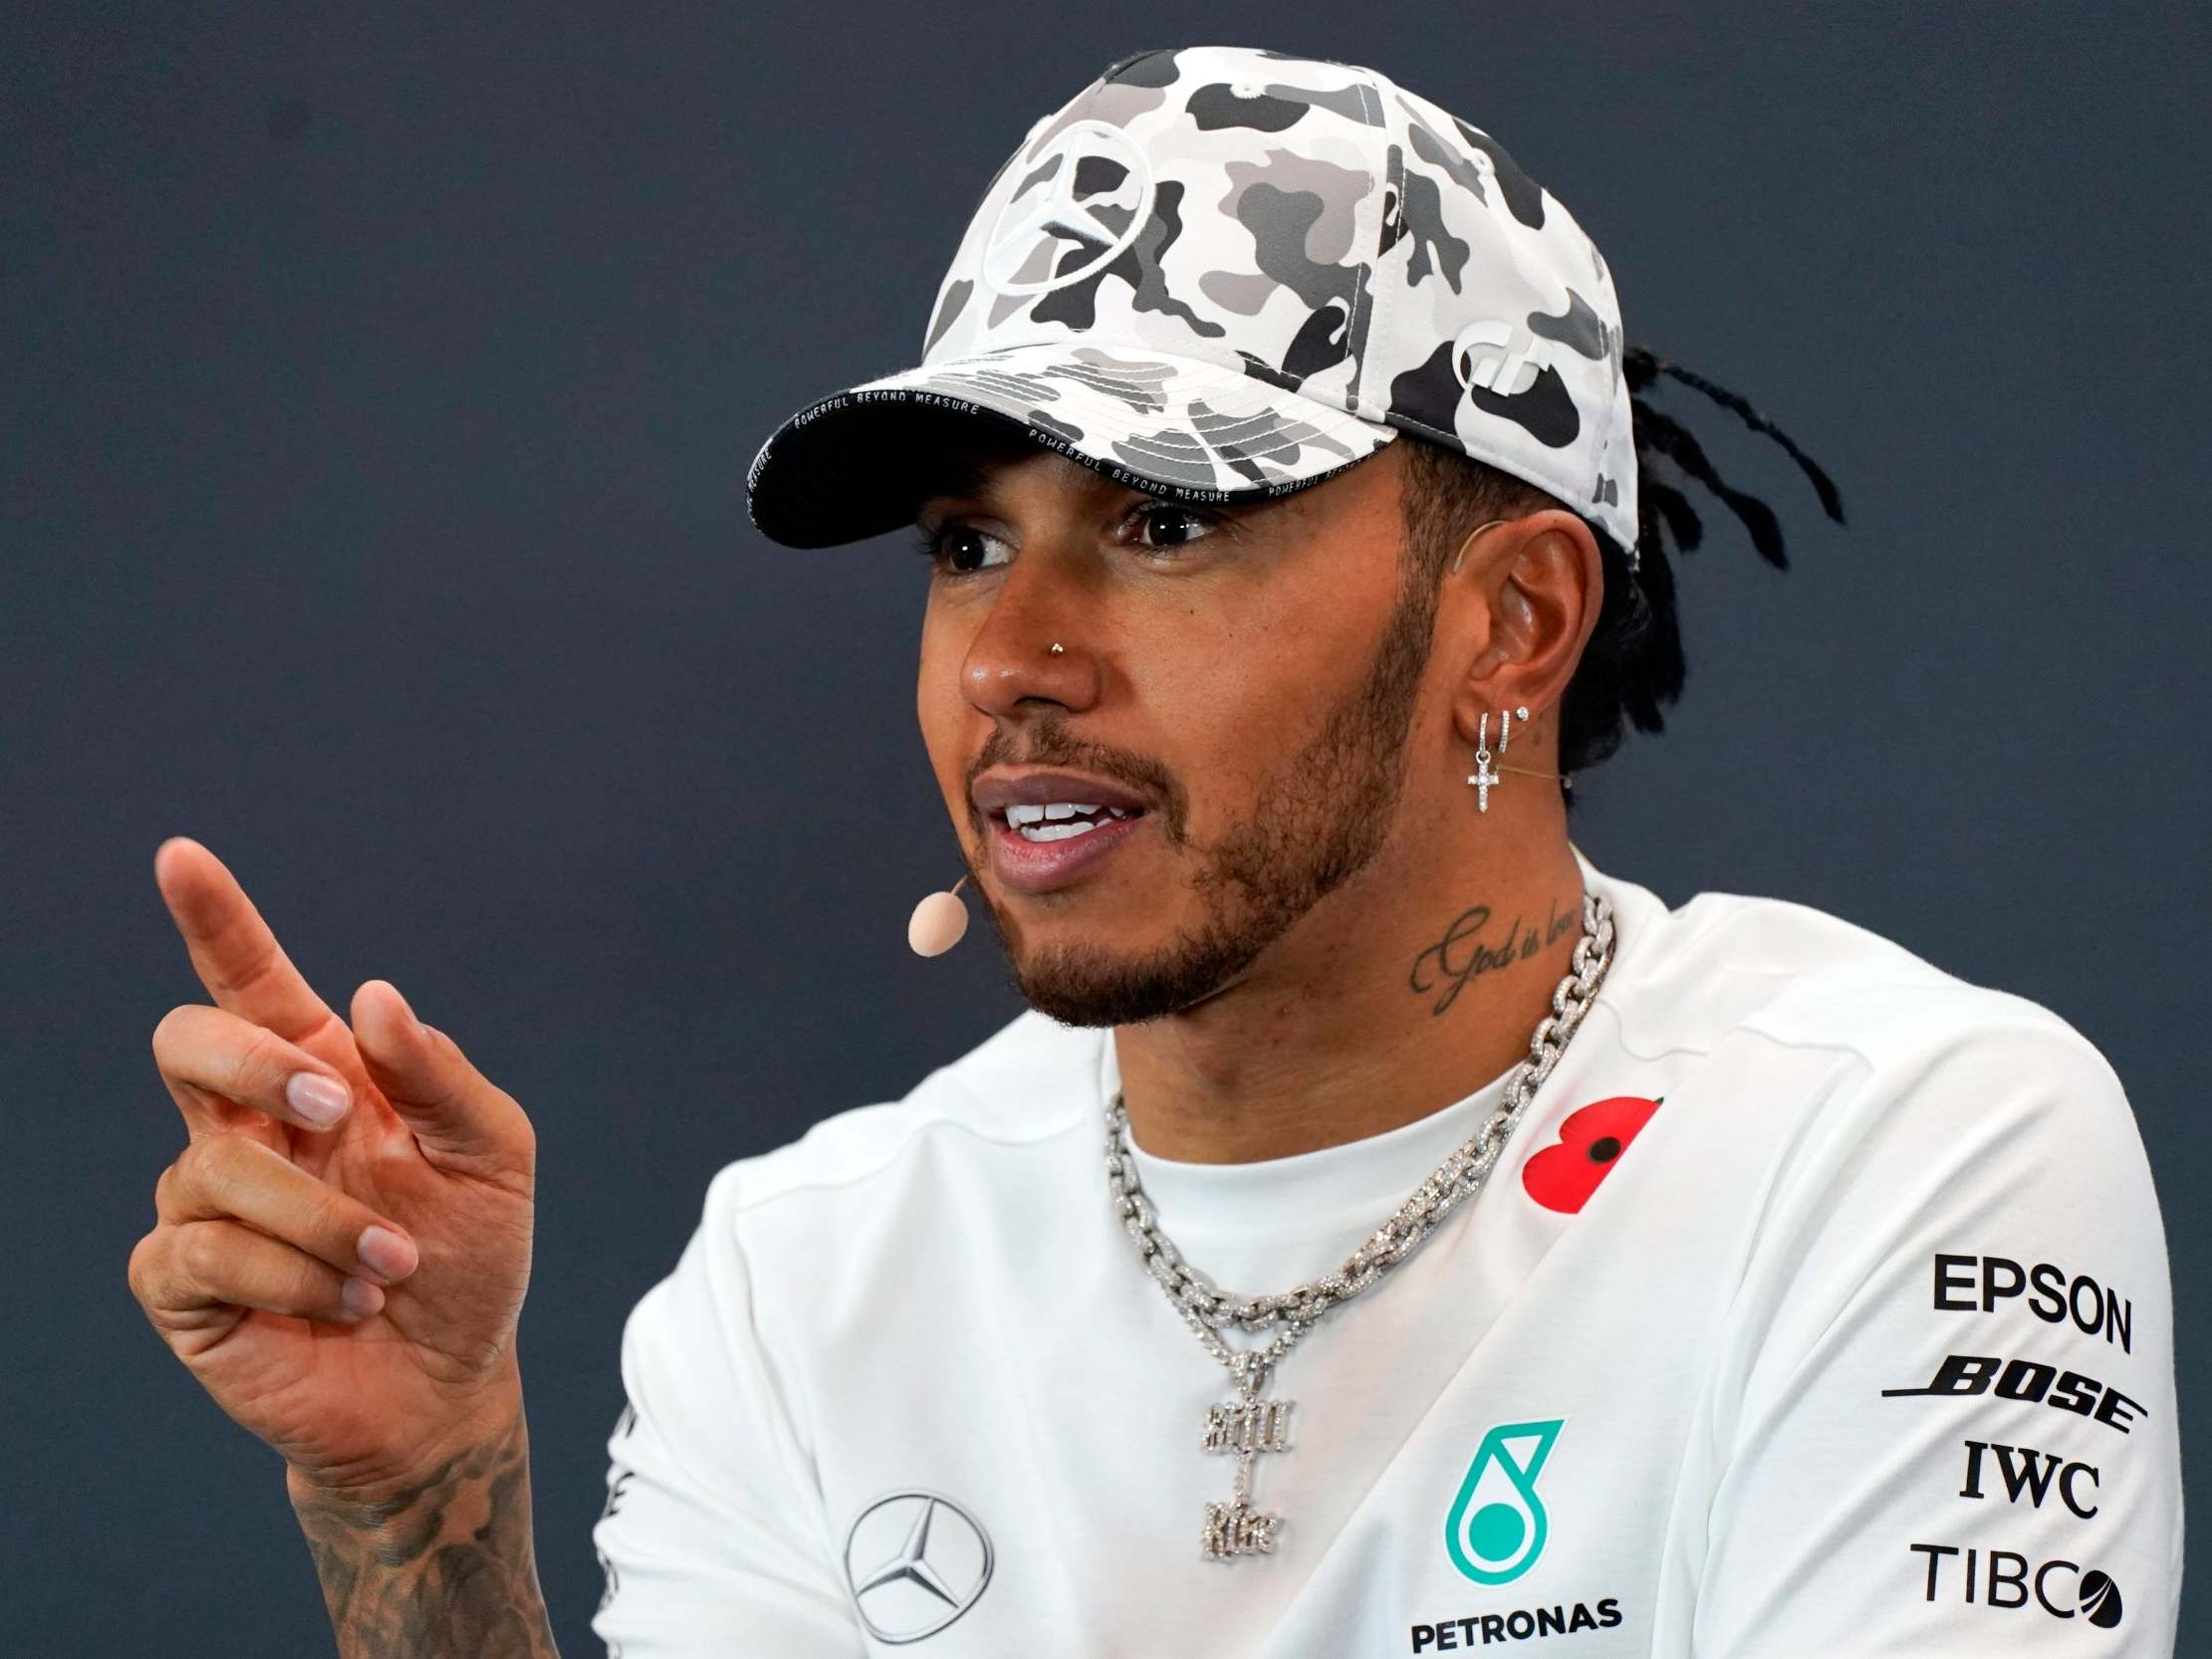 Hamilton may make his own protest when F1 gets underway next month